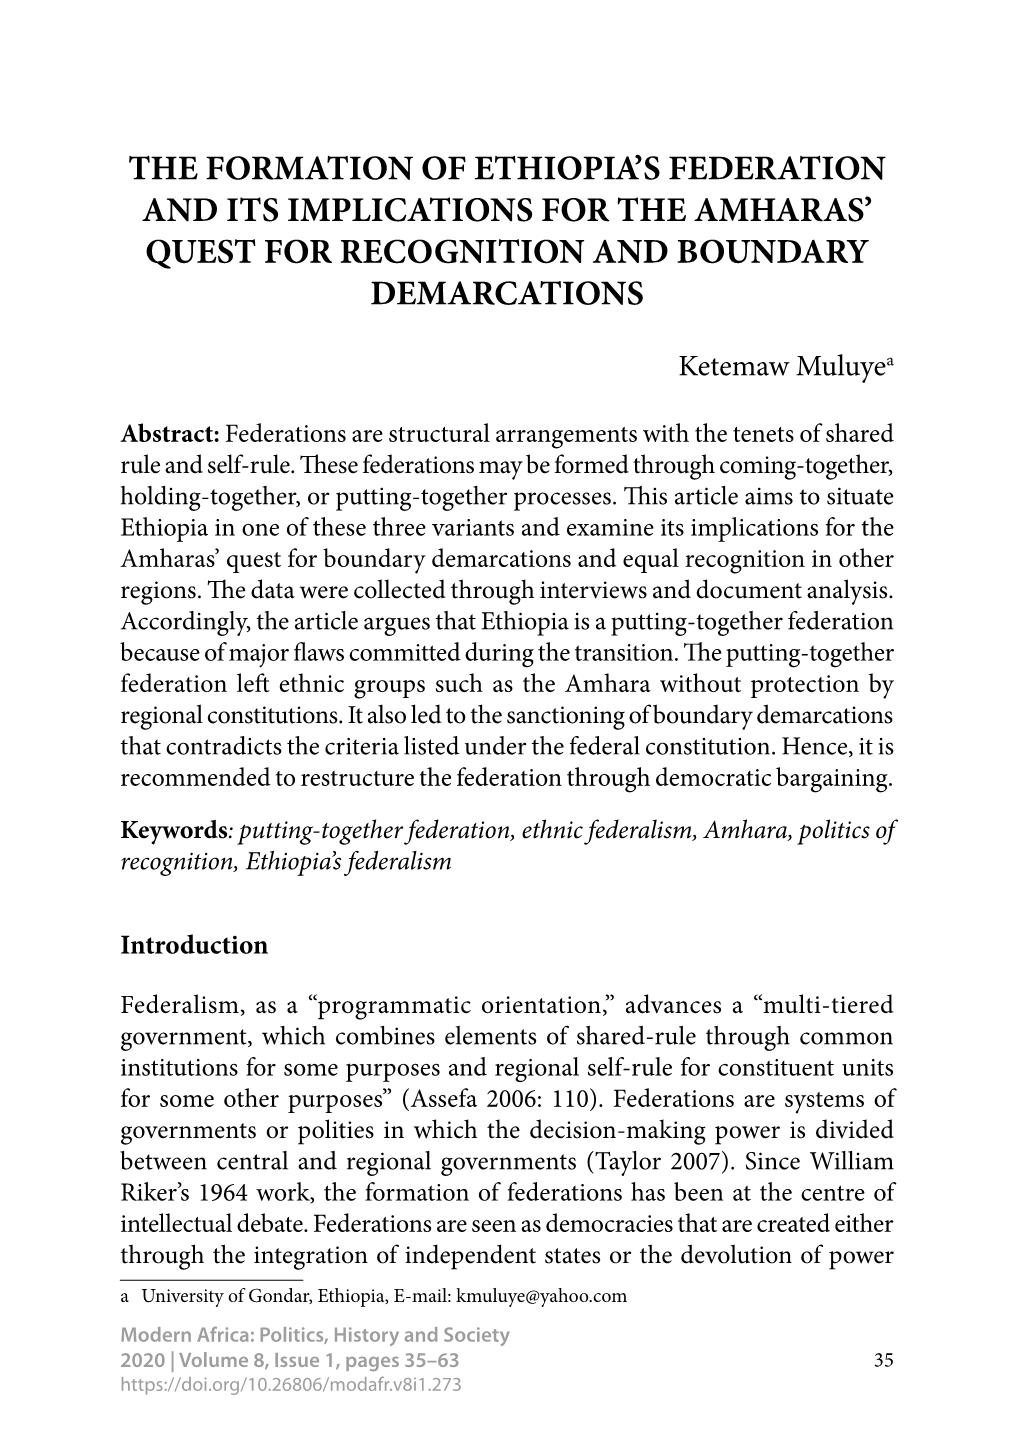 The Formation of Ethiopia's Federation and Its Implications for the Amharas' Quest for Recognition and Boundary Demarcations